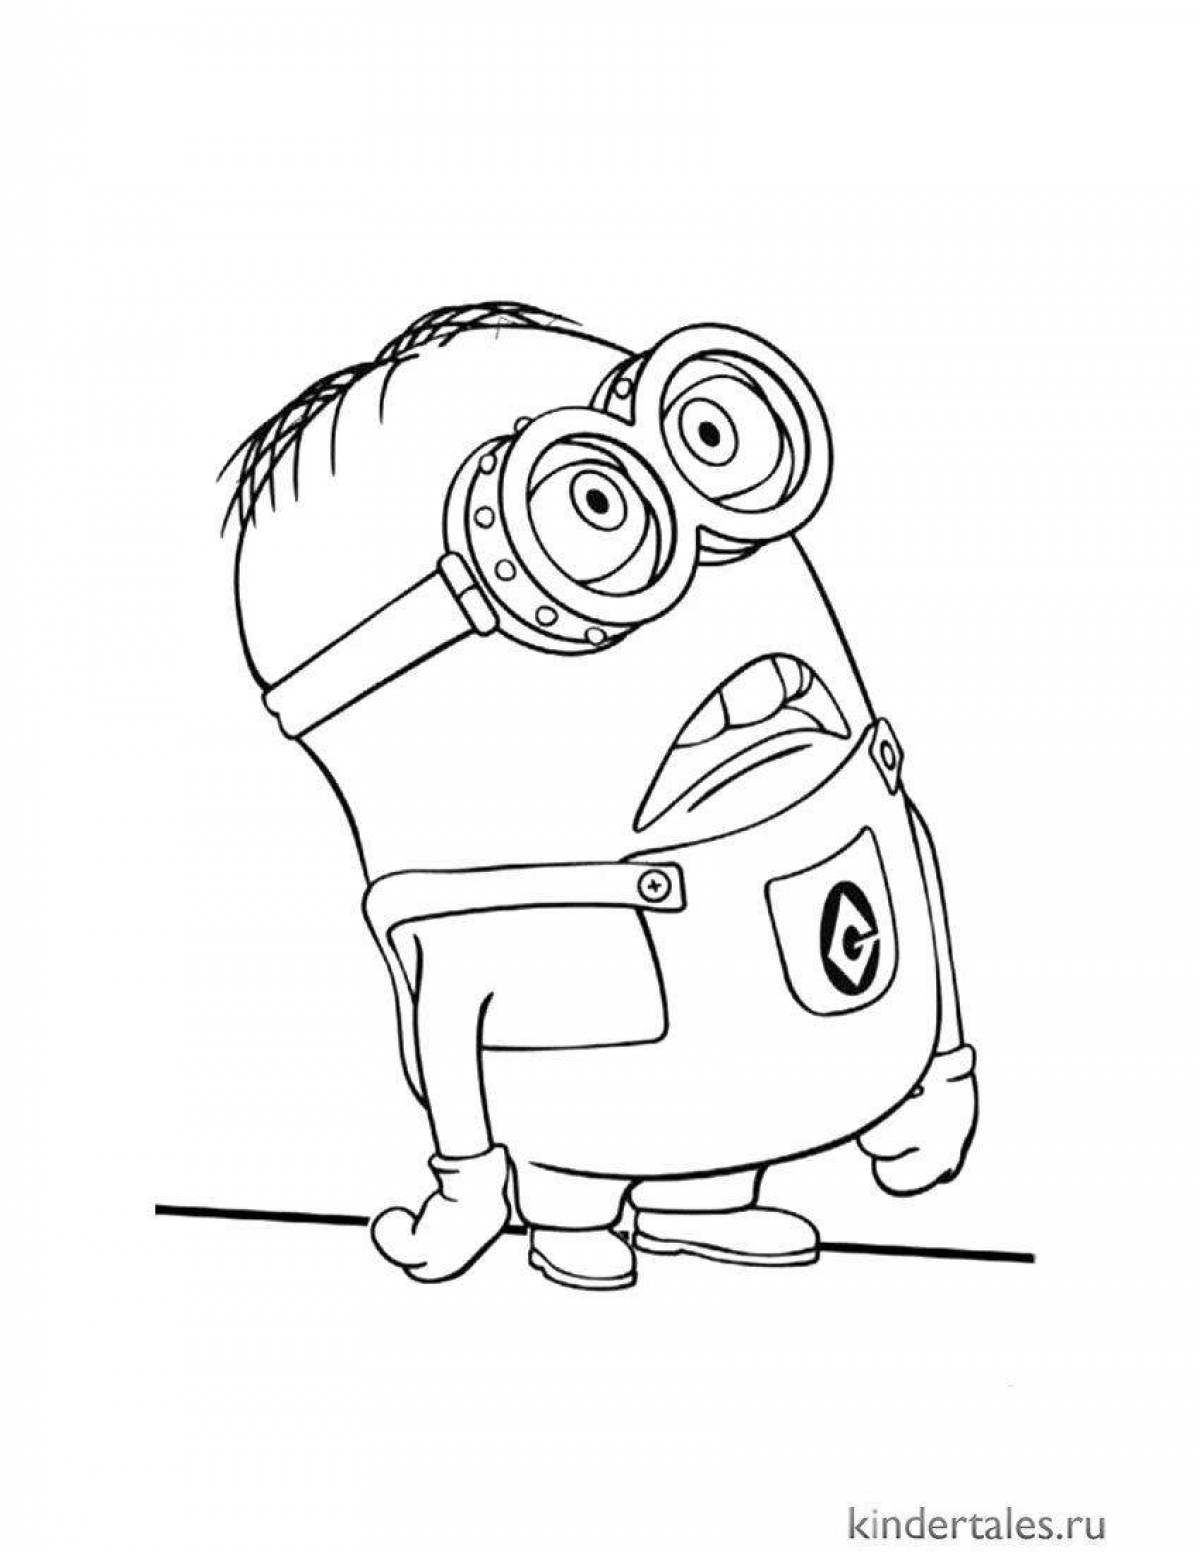 Despicable Me minions colorful coloring page